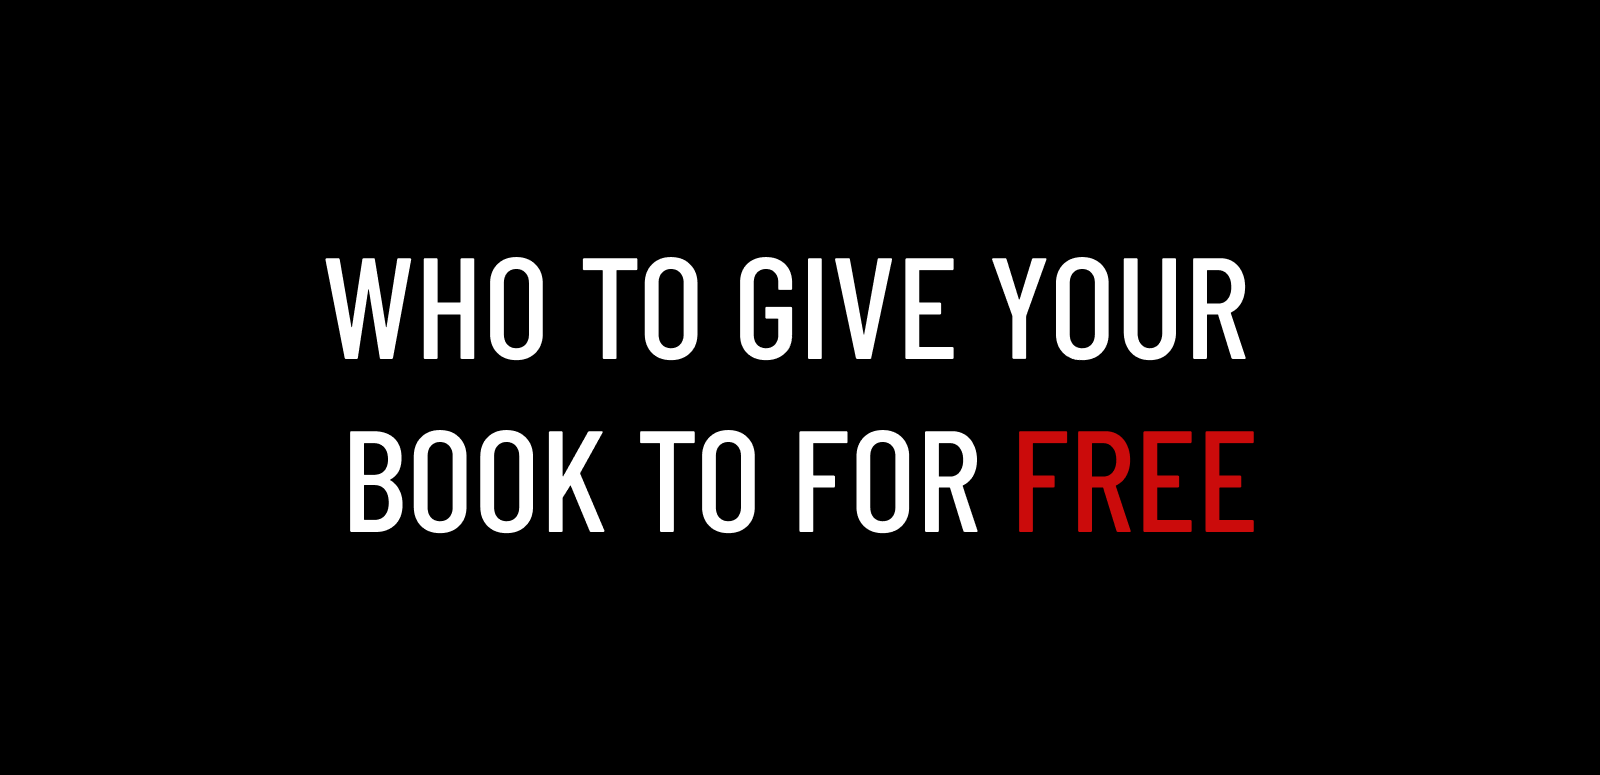 Who to give your book to for free